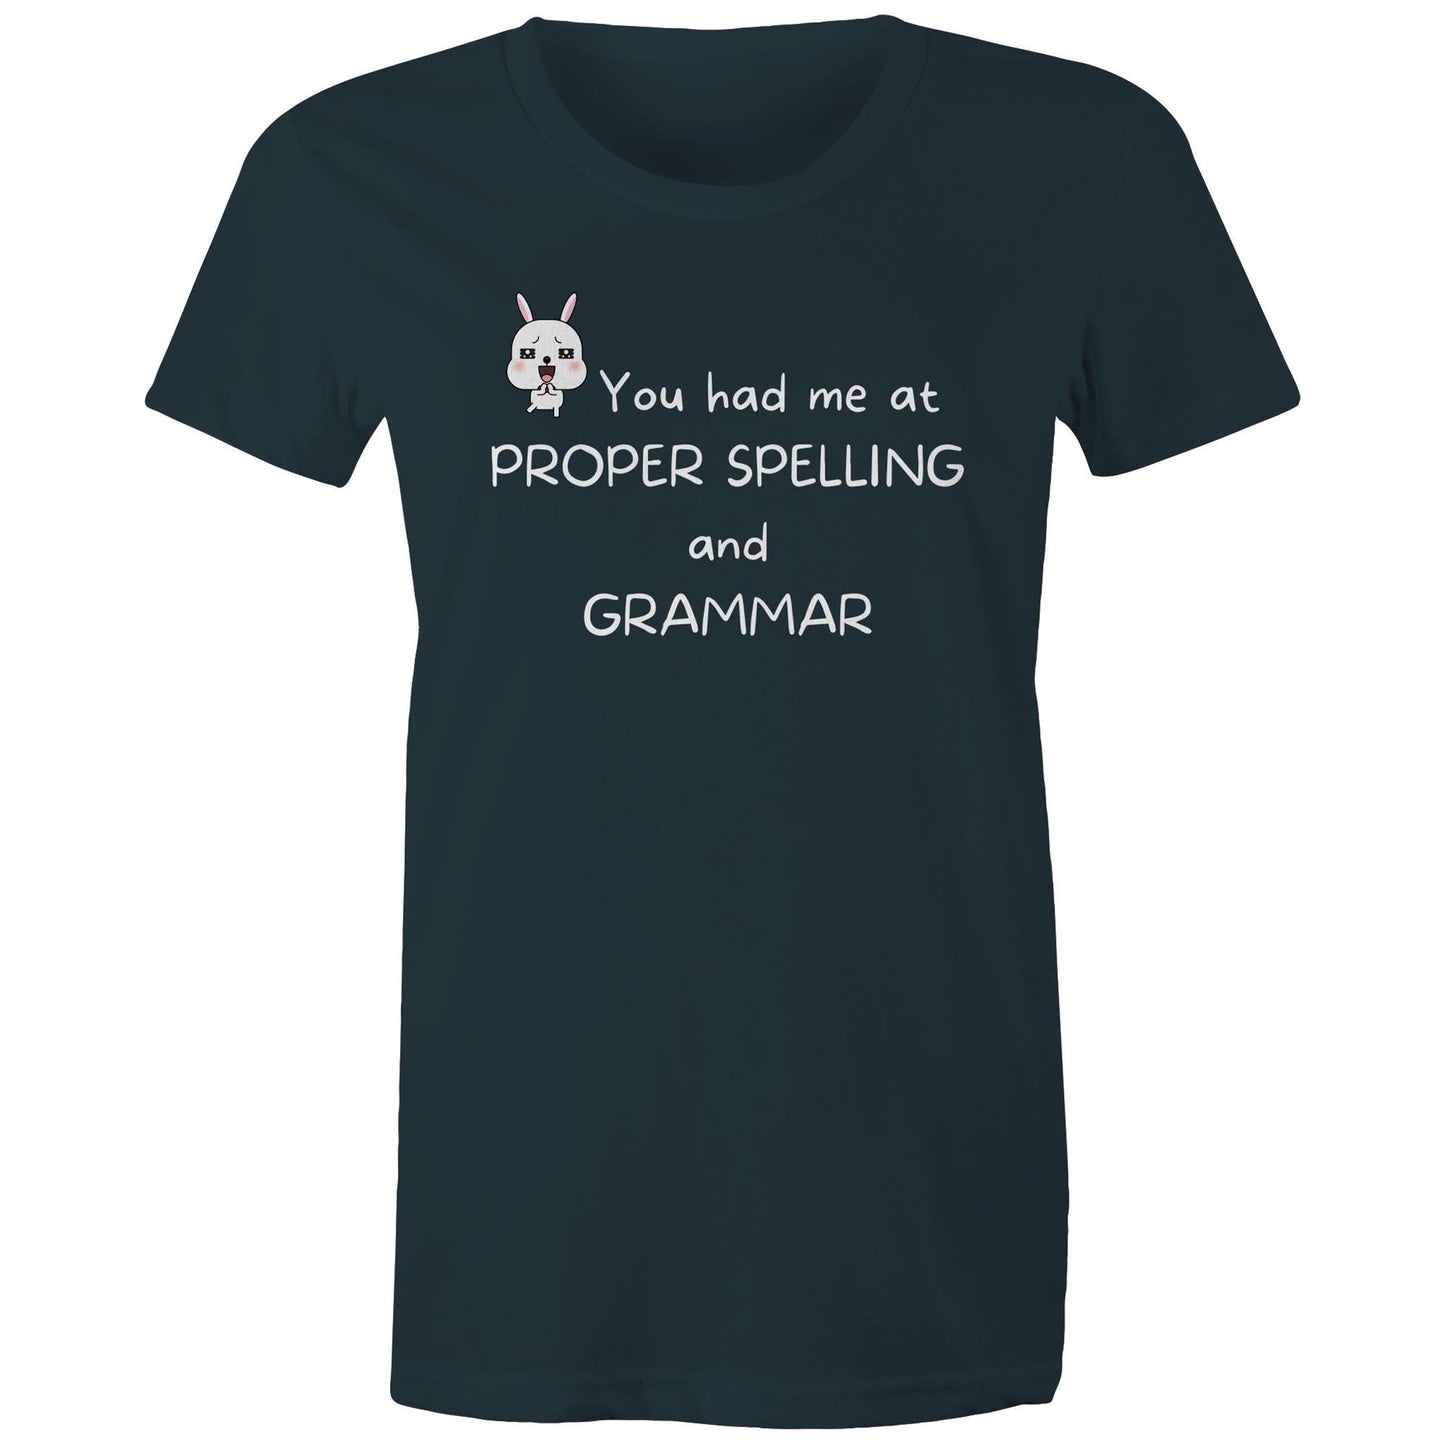 Proper and Spelling and Grammar  Women's Maple Tee